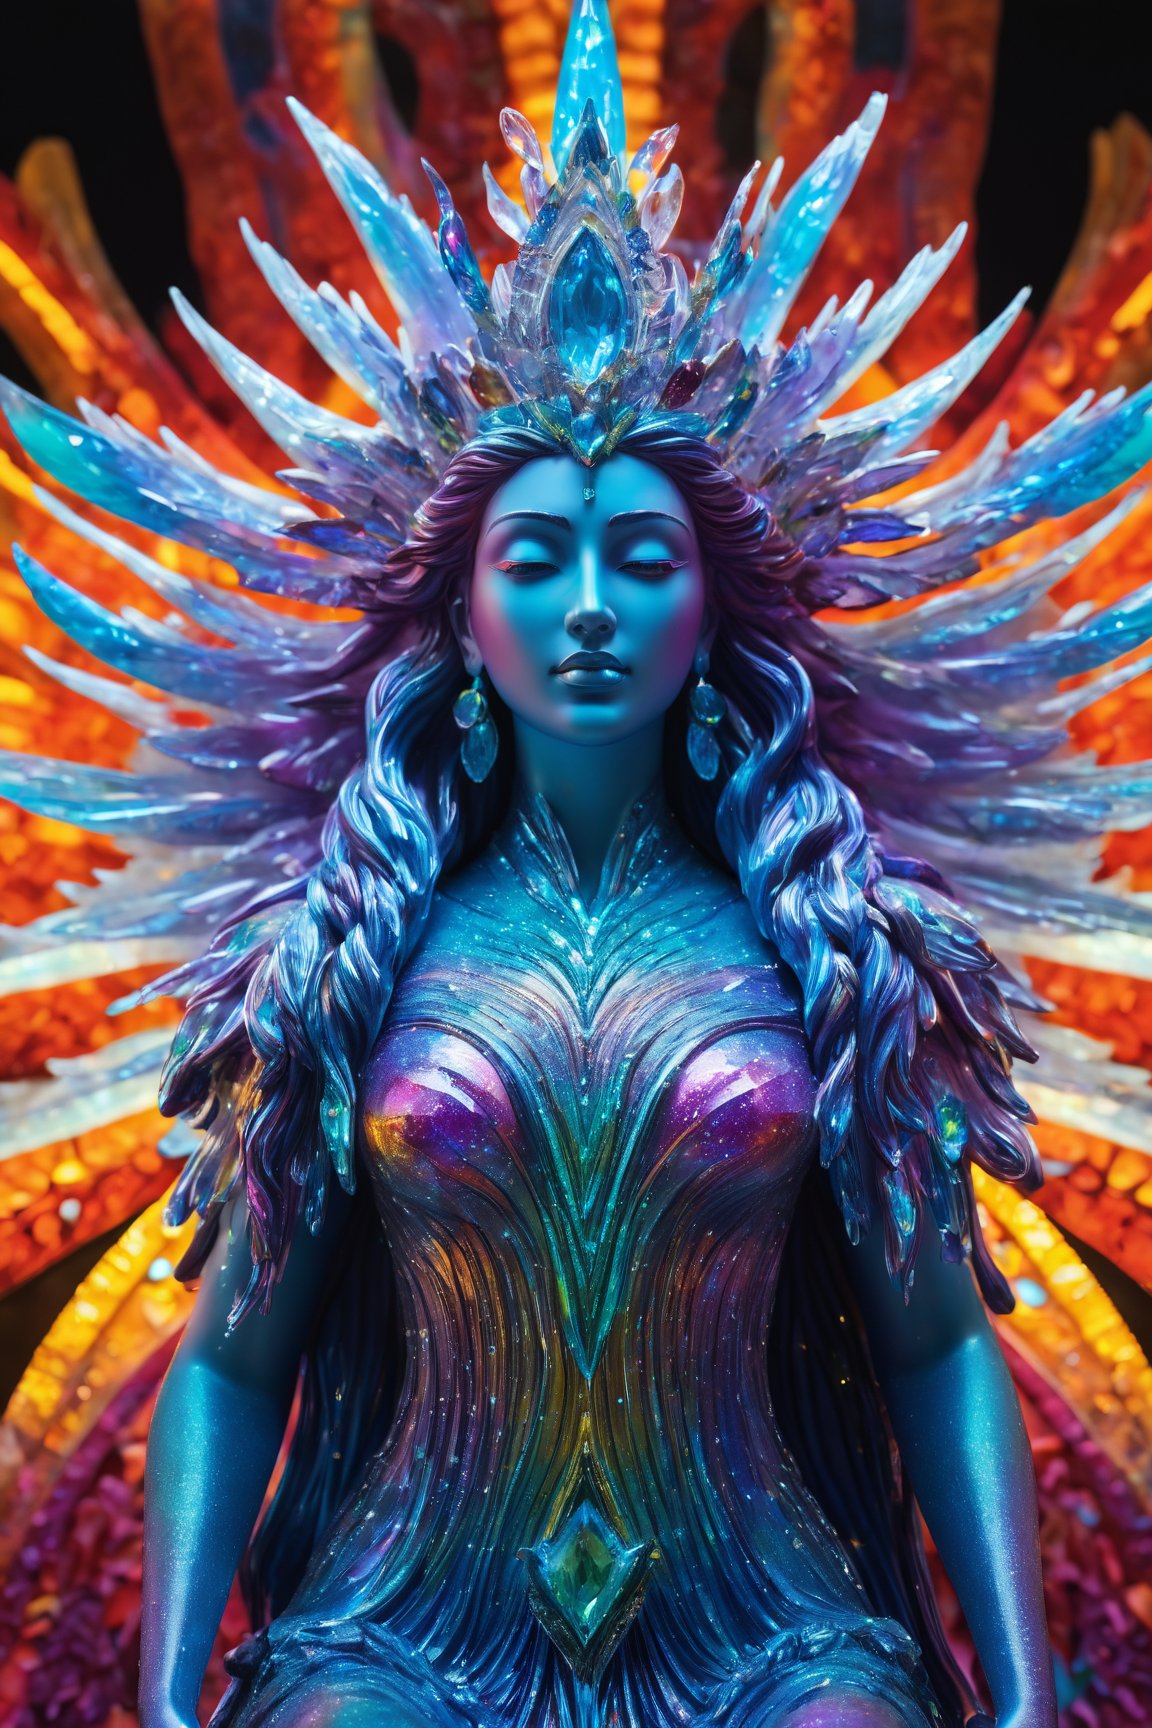 (best quality,8K,highres,masterpiece), ultra-detailed photograph featuring a vibrant sculpture portraying a mesmerizing ice goddess. This majestic deity stands tall in a burst of vivid colors, radiating an enchanting aura of rainbow-hued elegance. The sculpture showcases an explosion of vibrant and intricate designs, capturing the eye with a dazzling array of hues. The goddess is bathed in a kaleidoscope of colors, adding a surreal and otherworldly touch that creates a stunning contrast against the cool, icy tones. This high-quality image skillfully captures the ethereal beauty of the sculpture, allowing viewers to marvel at its breathtaking craftsmanship and mystical allure, illuminated by neon lights.